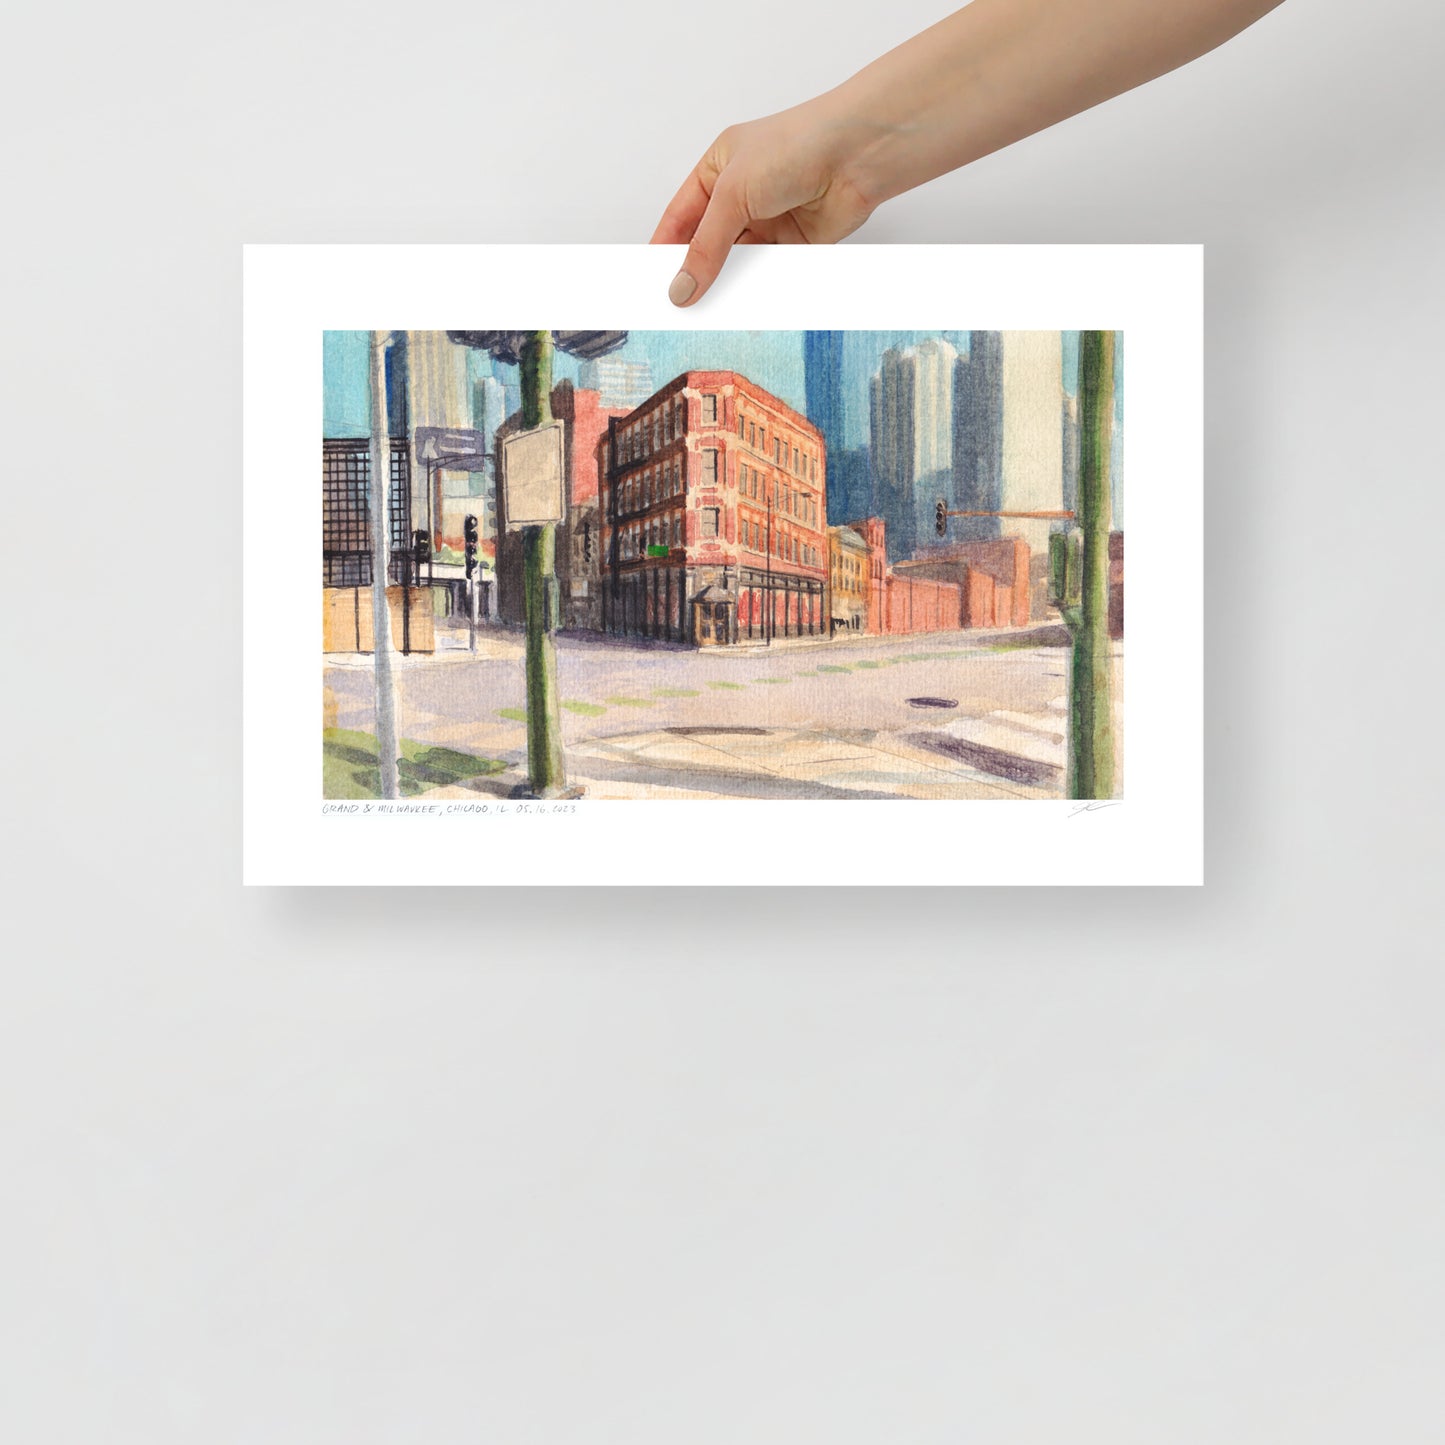 Grand & Milwaukee, Chicago | 18 in. x 12 in. | "Chicago Style" Art Print